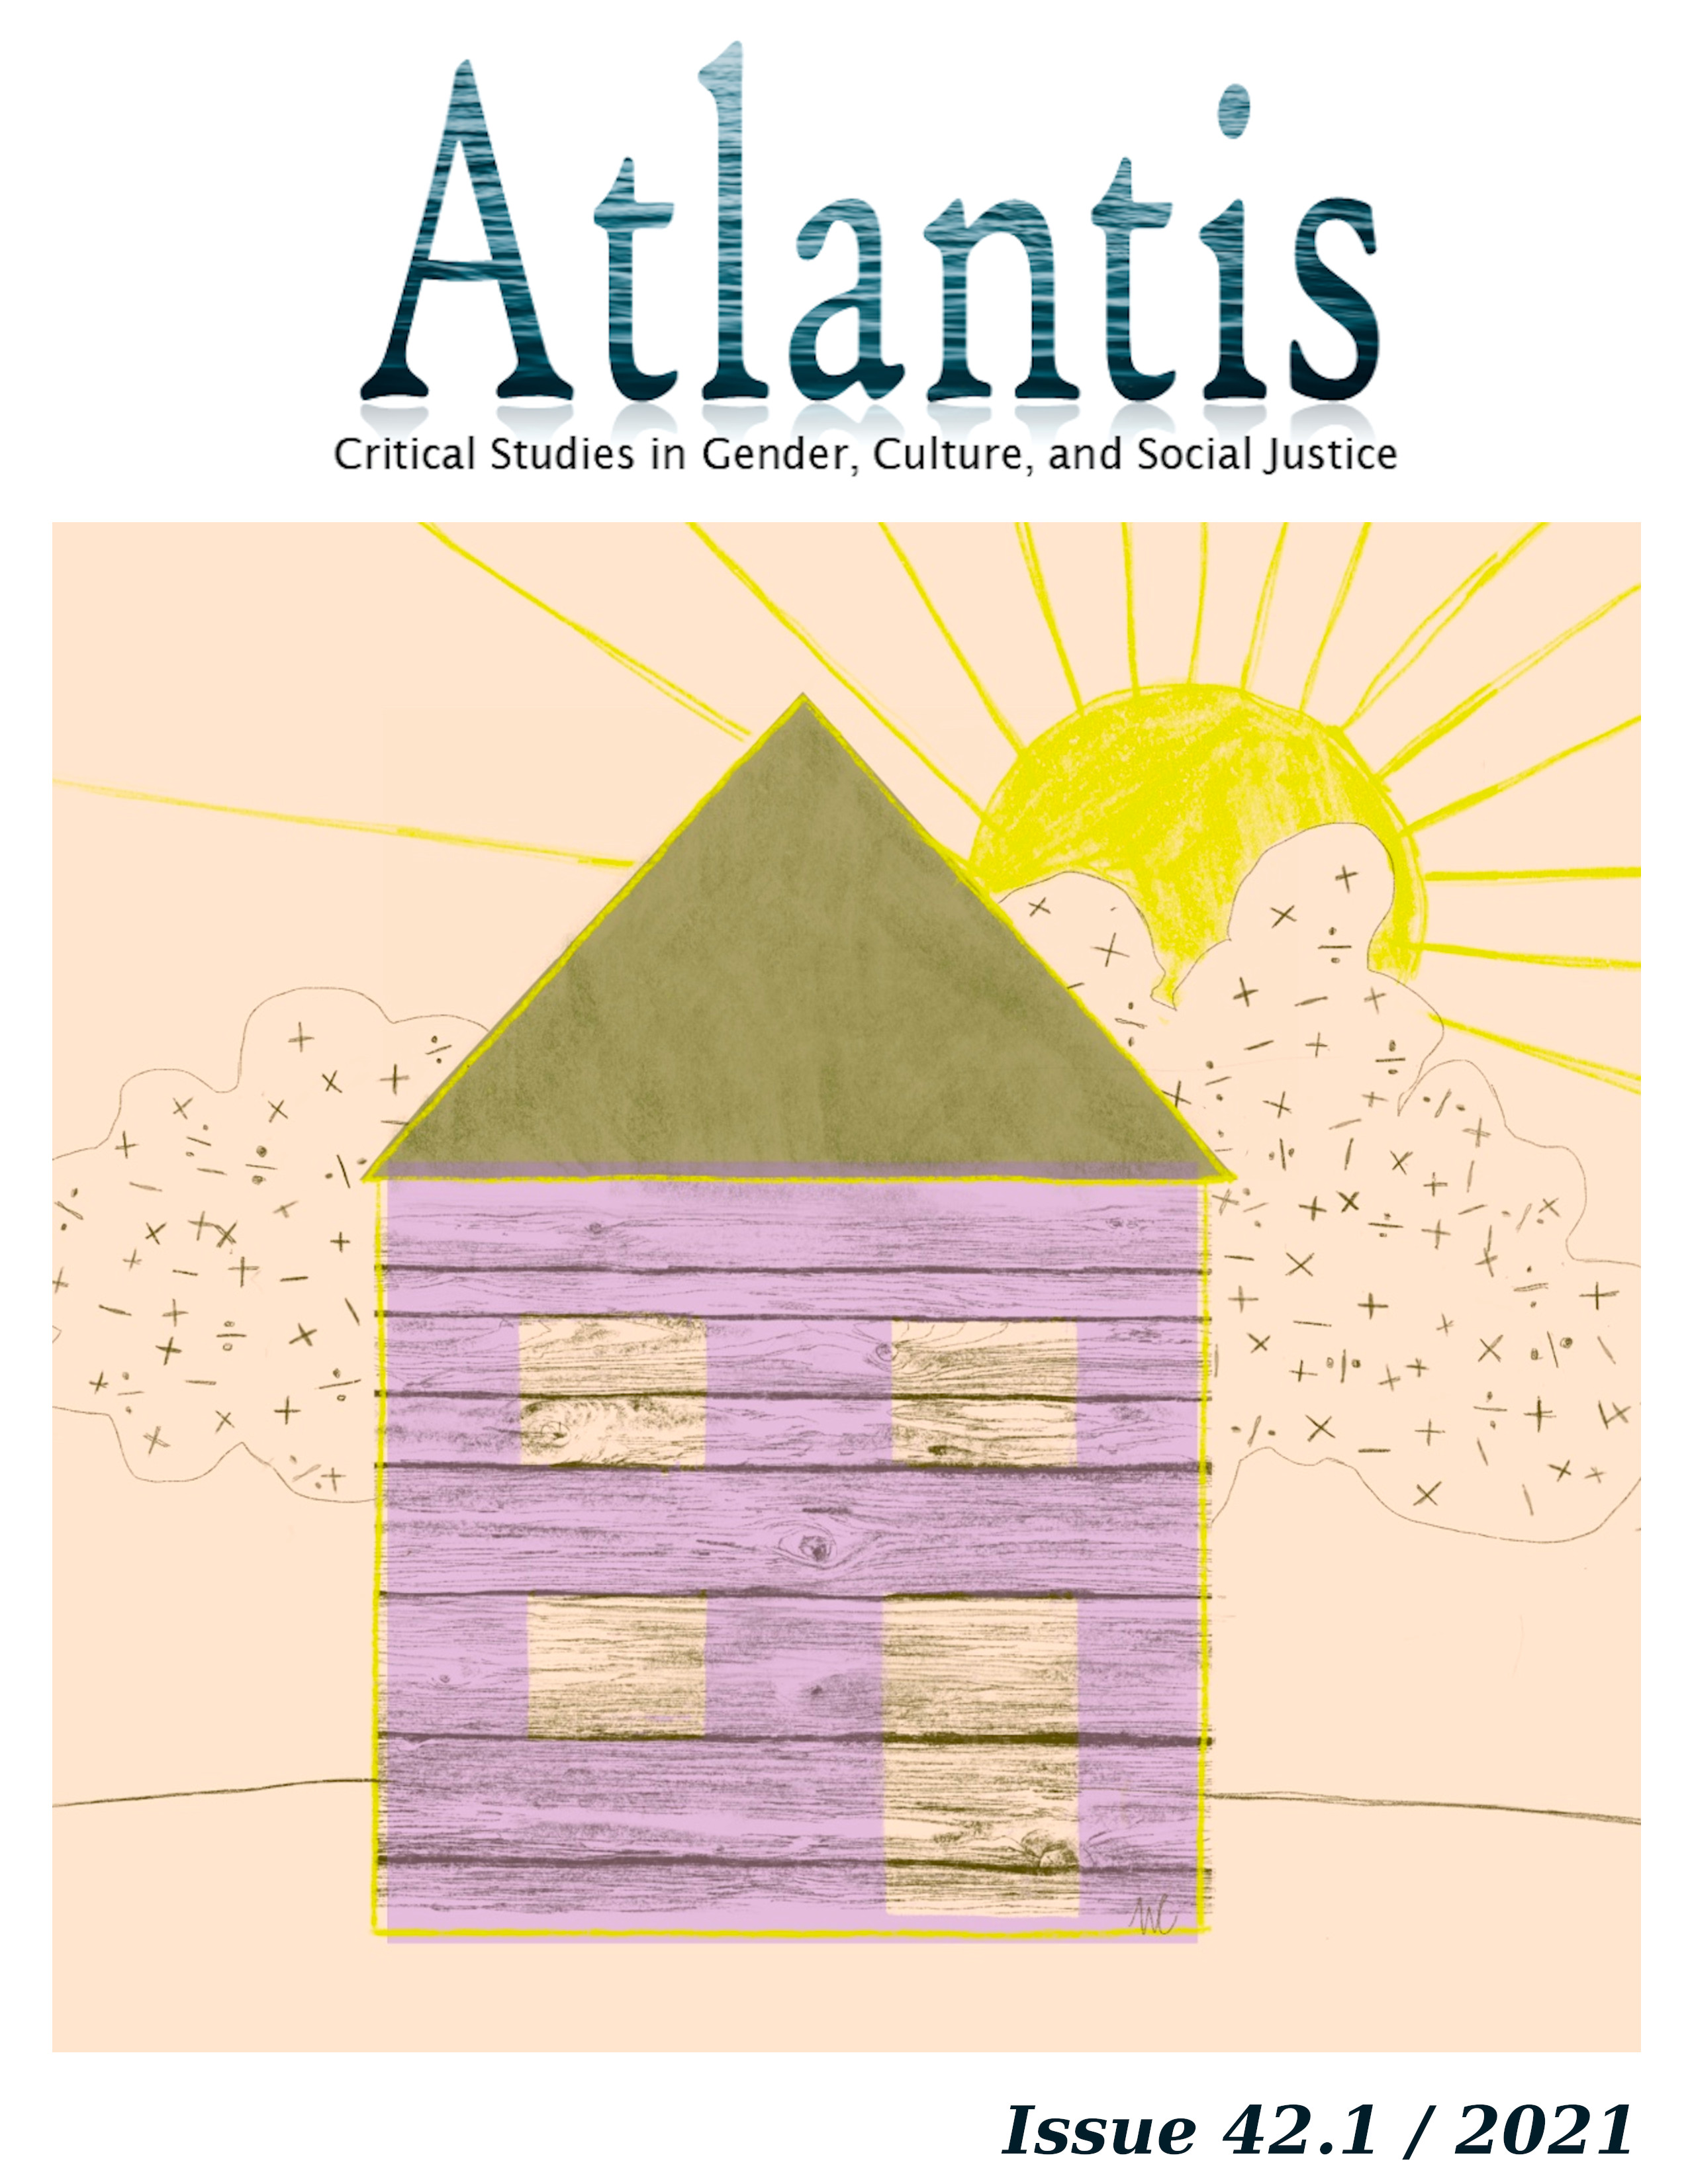 Illustration by Marianne Charlebois showing a wooden house and a cloud with mathemathical signs.